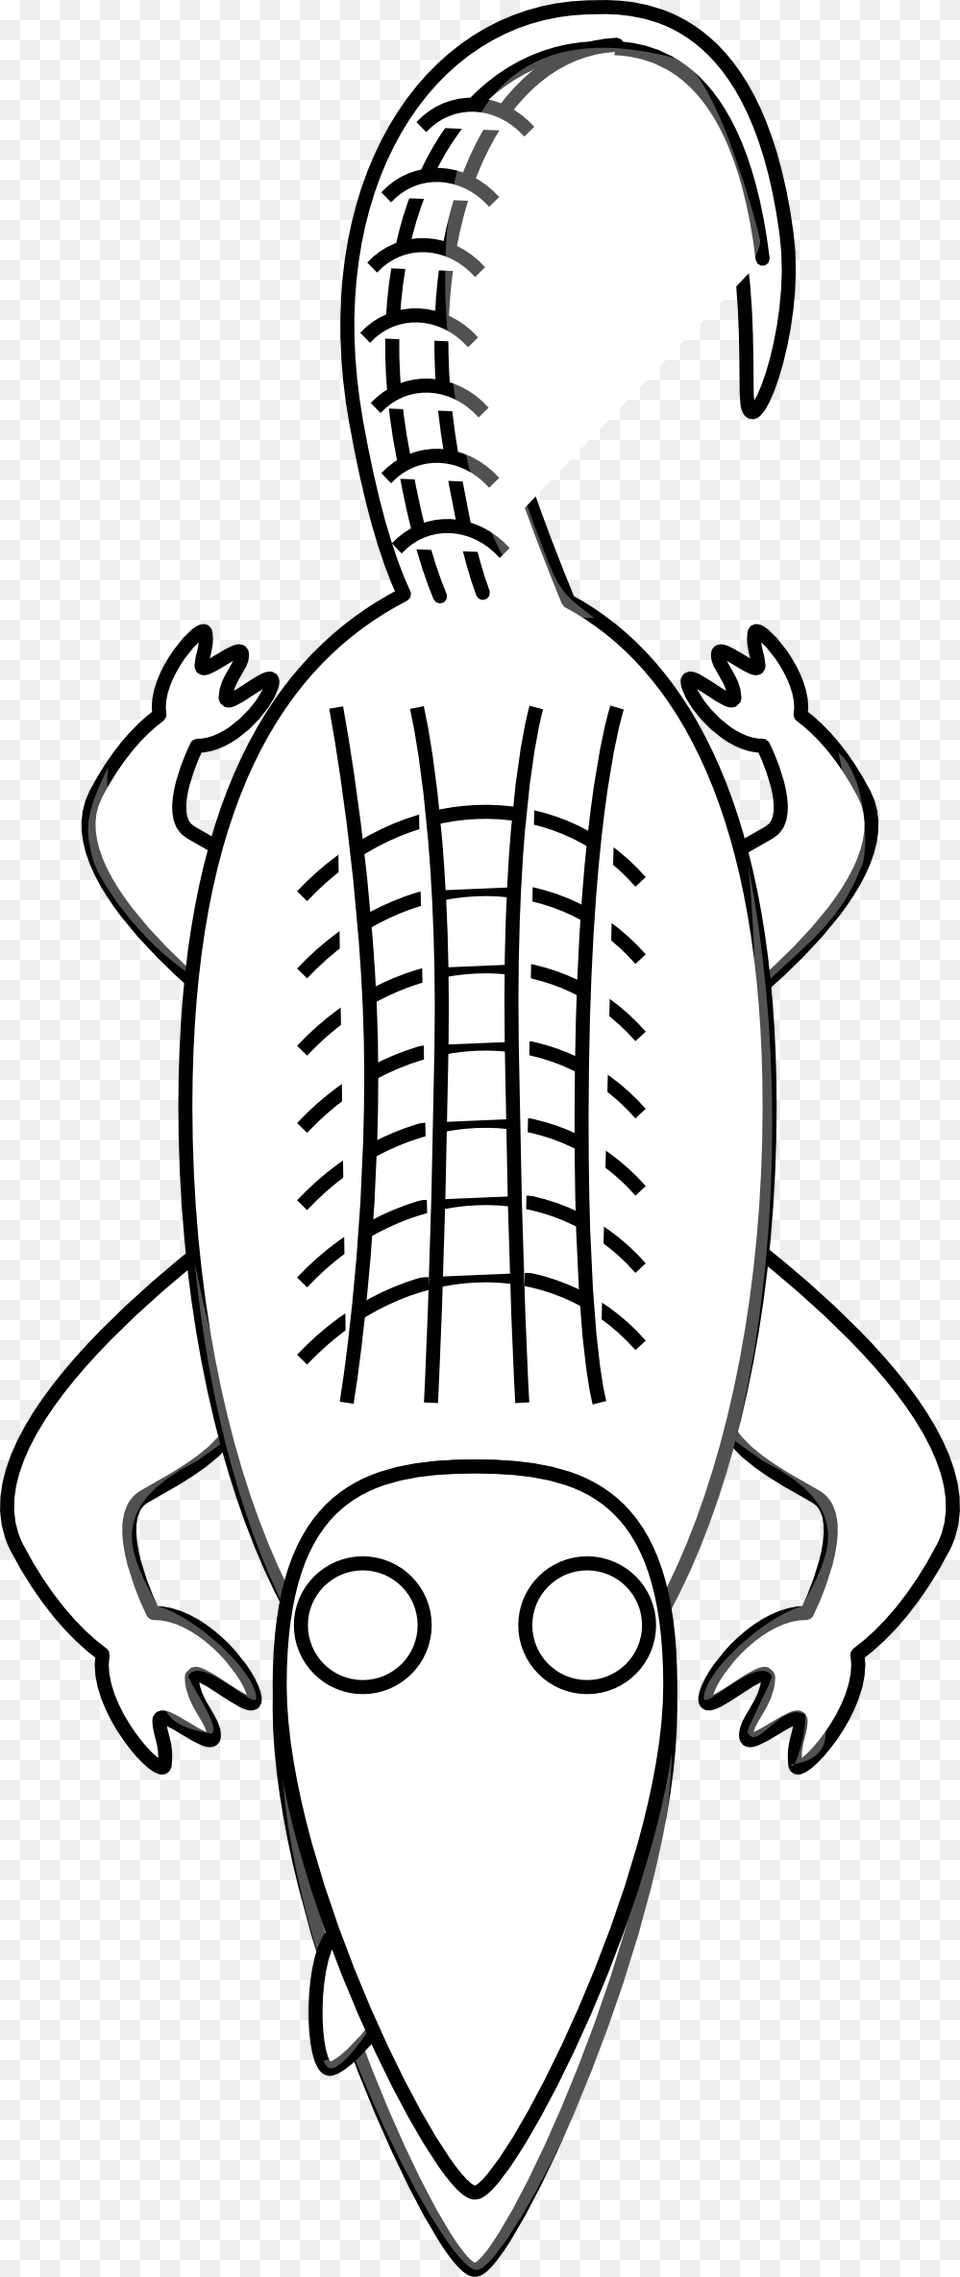 Alligator Clipart Black And White Click Art Black And White Crocodile, Stencil, Ammunition, Grenade, Weapon Png Image